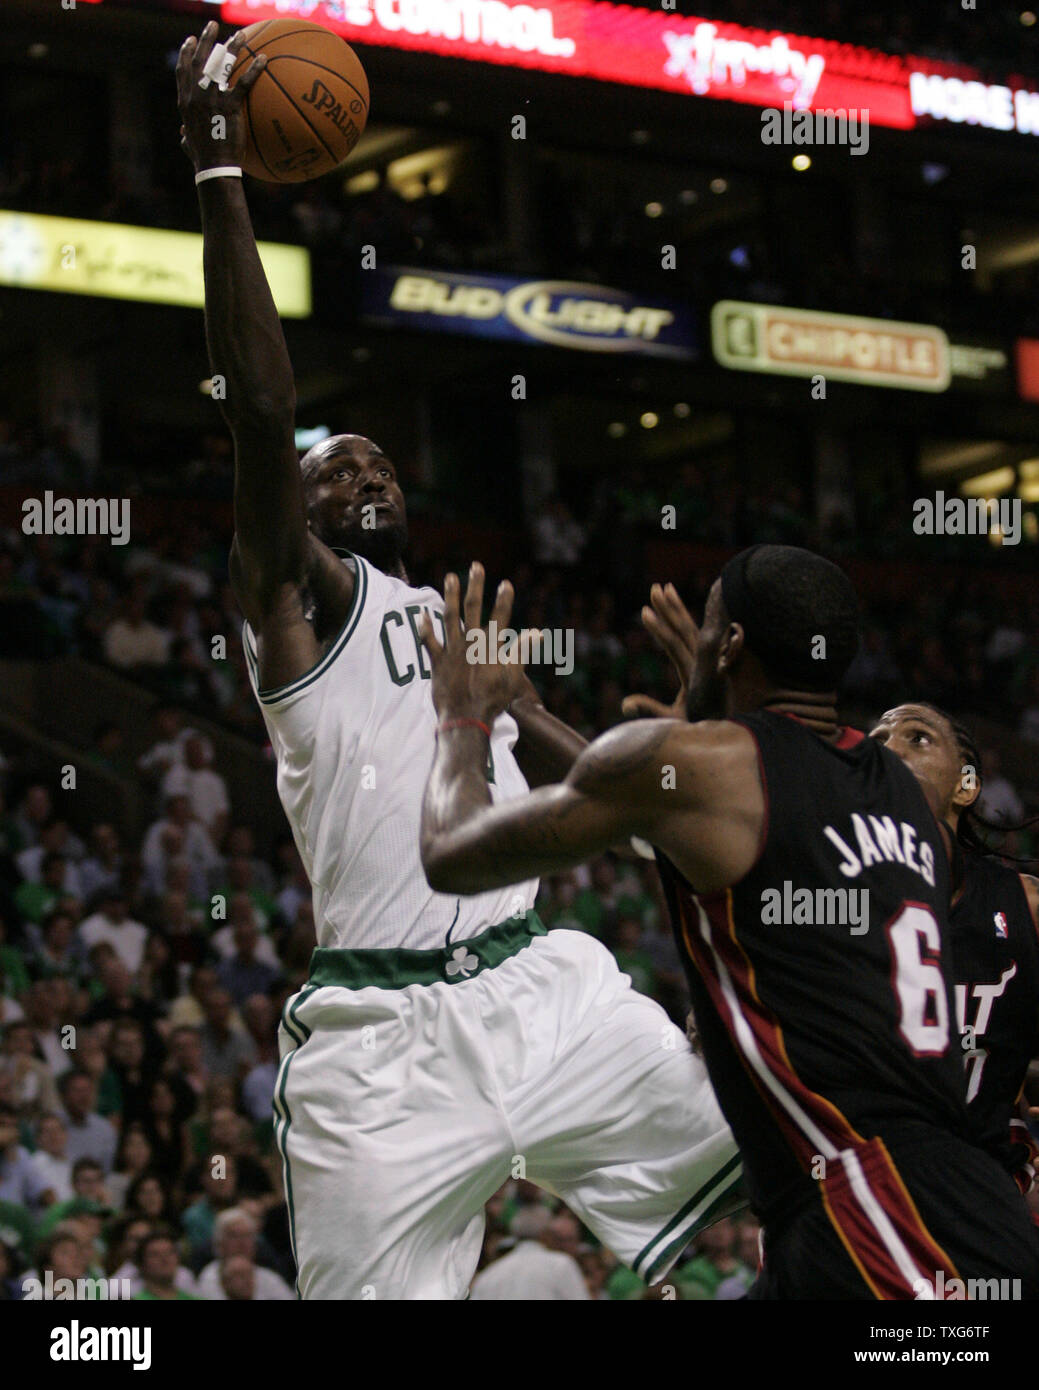 Boston Celtics forward Kevin Garnett gets off a shot past Miami Heat forward LeBron James (6) and Udonis Haslem in the first half of the opening night game at the TD Garden in Boston, Massachusetts on October 26, 2010.   UPI/Matthew Healey Stock Photo